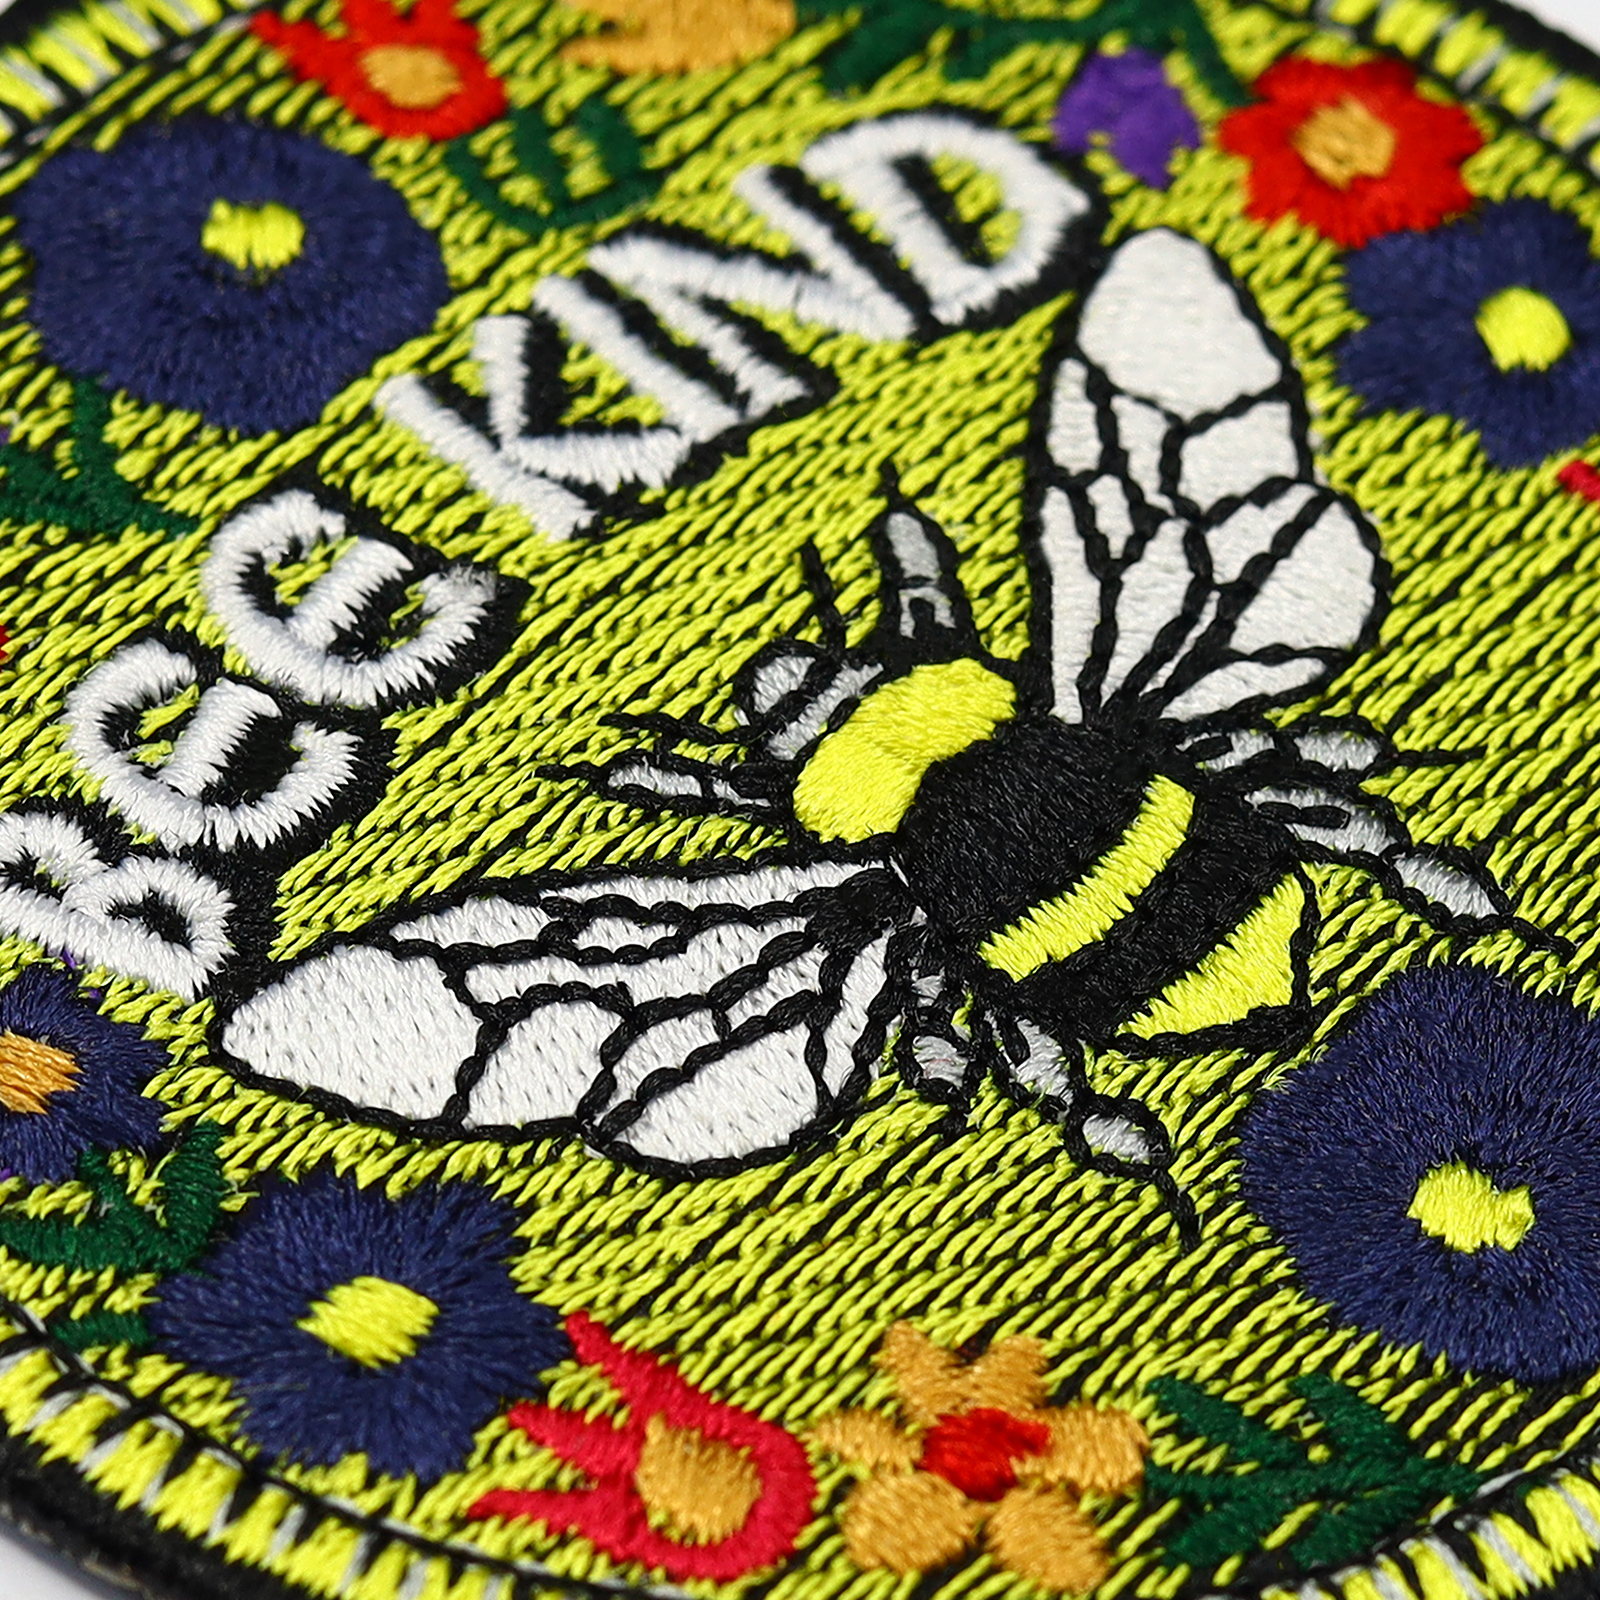 Bee kind - Patch